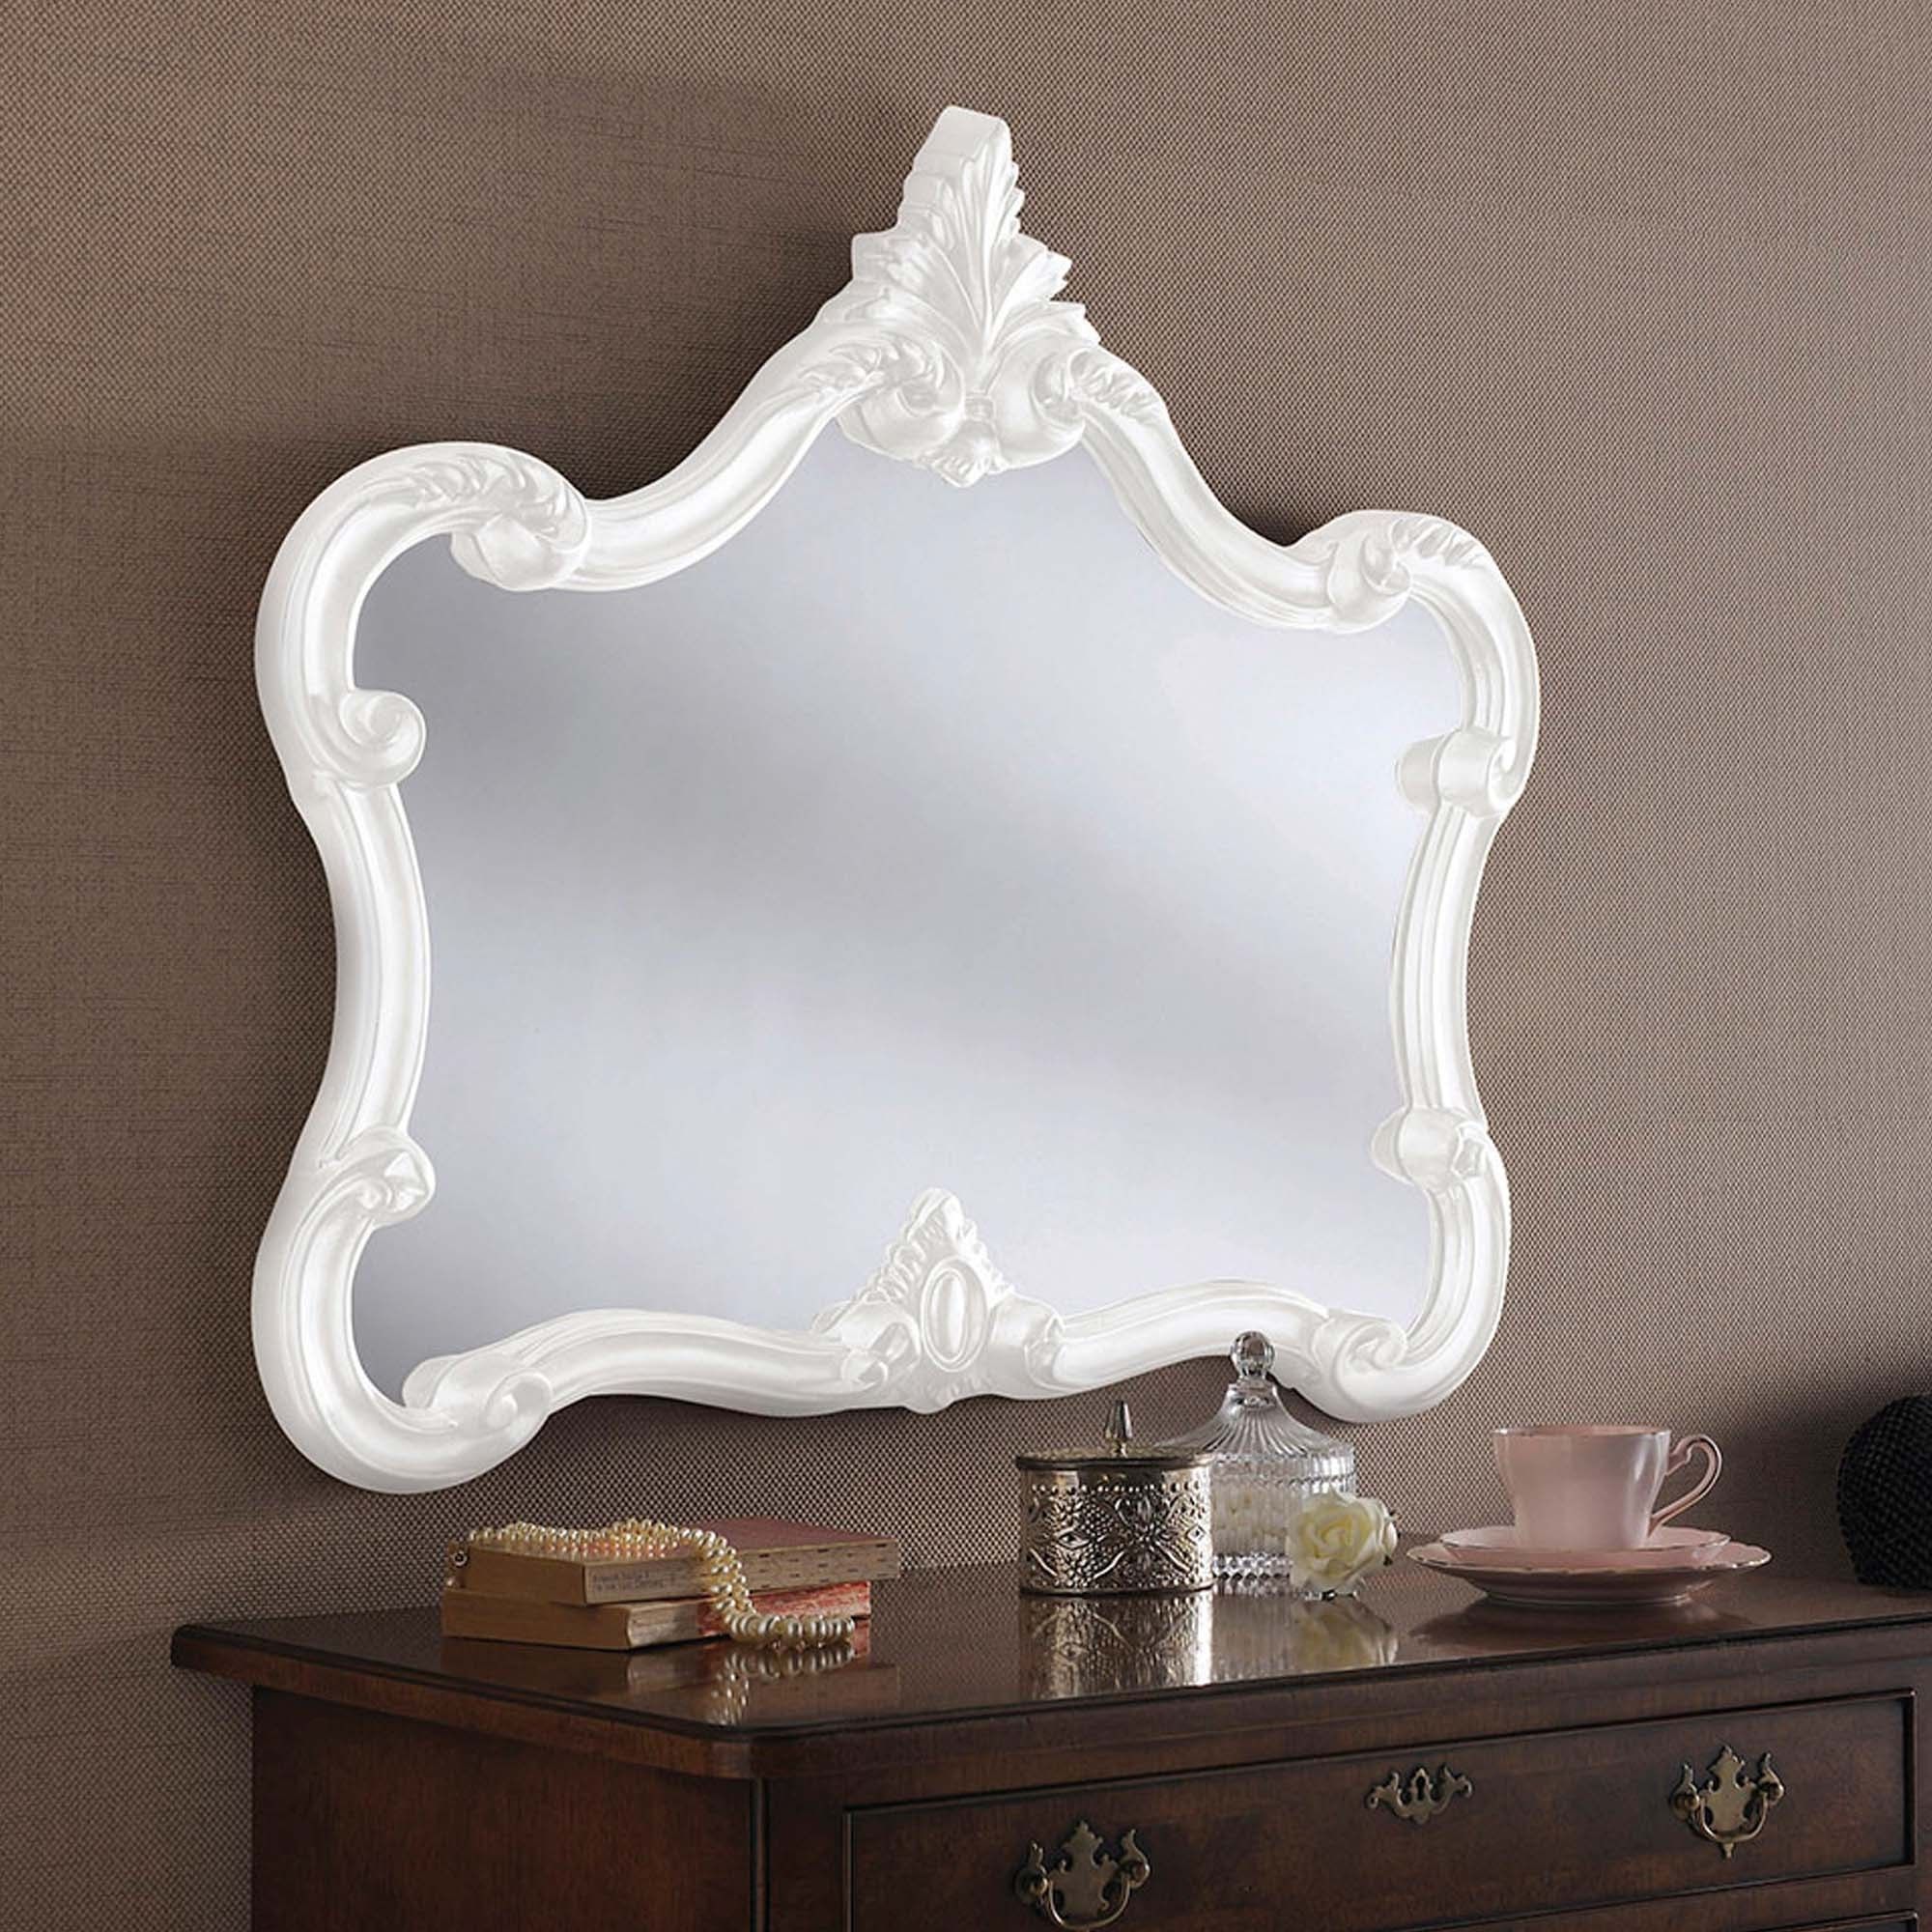 Antique French Style White Ornate Wall Mirror | Wall Mirrors Pertaining To Antiqued Glass Wall Mirrors (View 6 of 15)